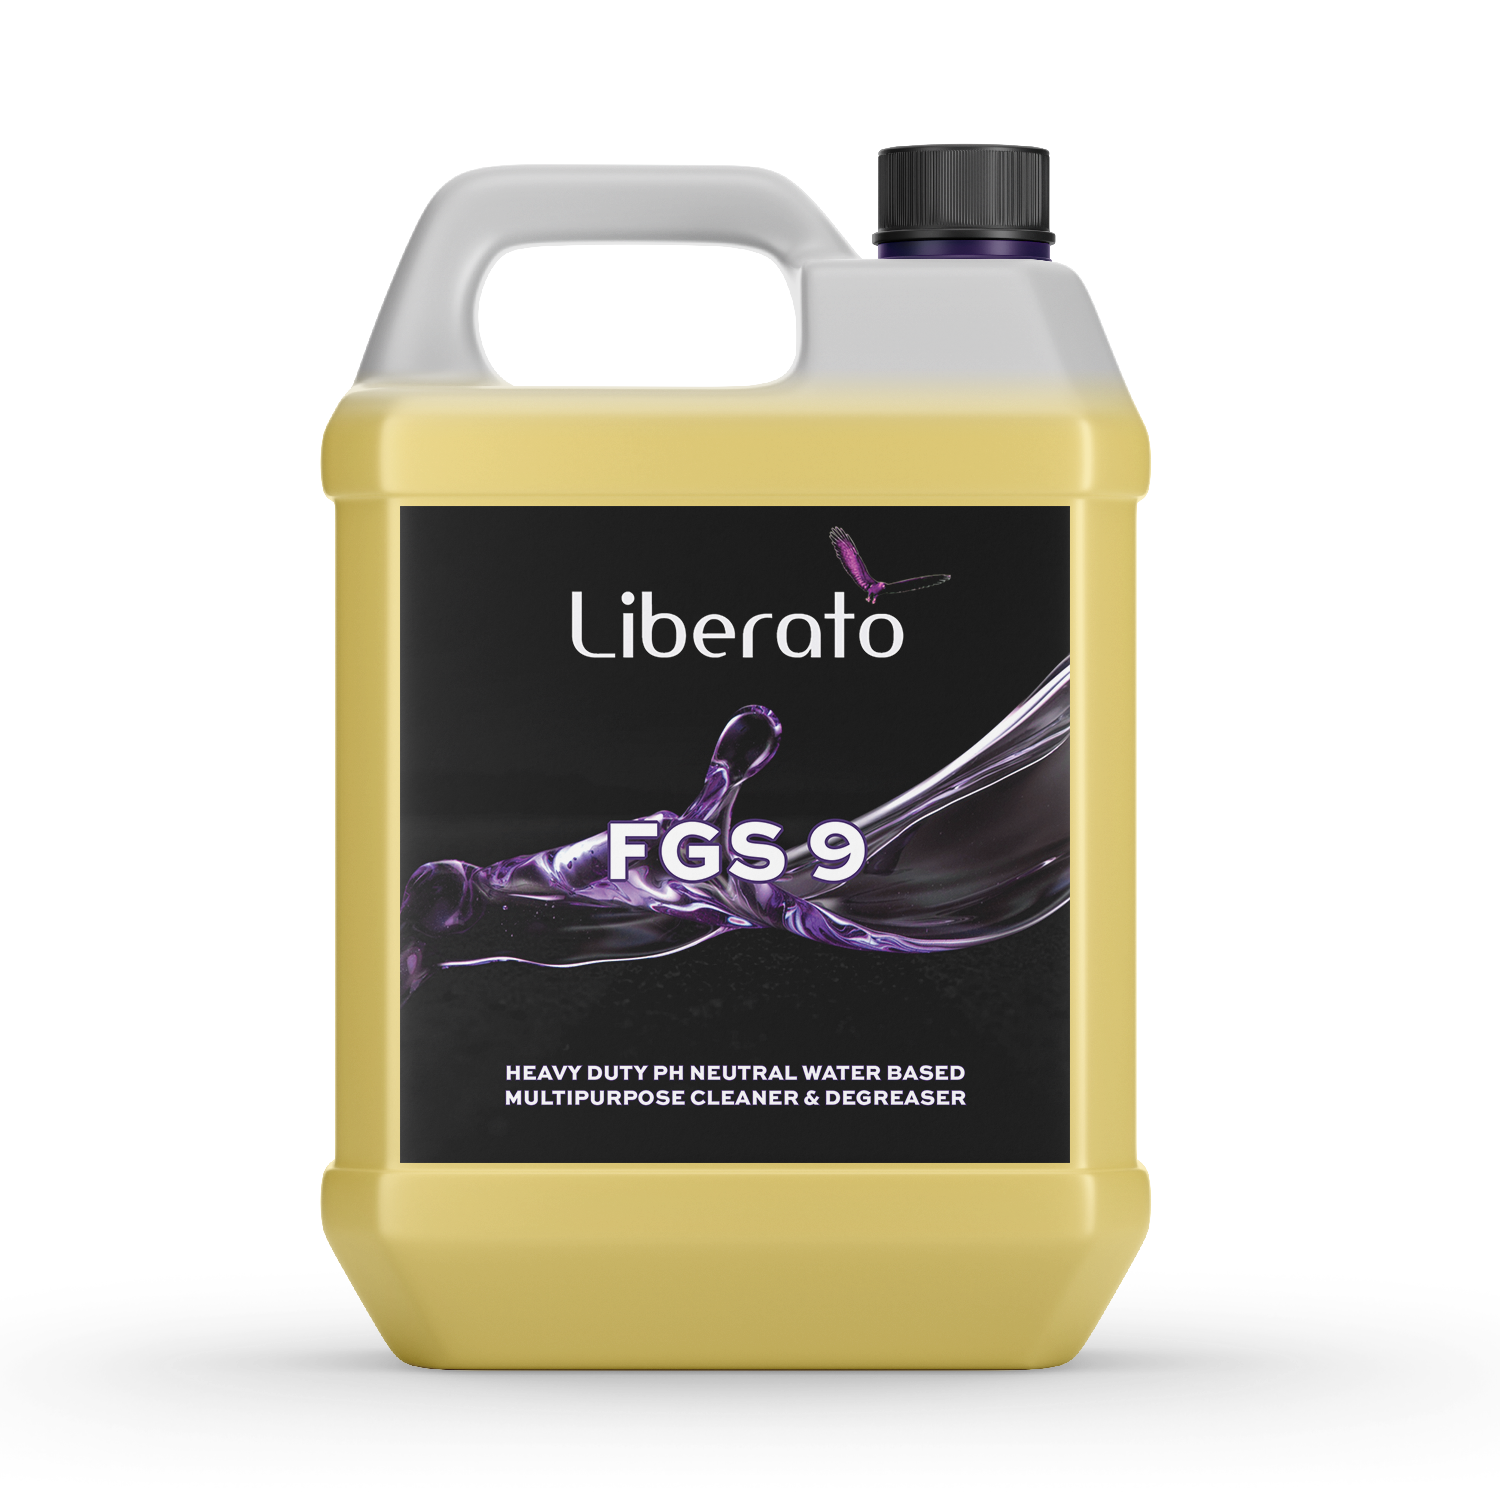 liberato fgs 9 heavy duty water based multipurpose cleaner and degreaser